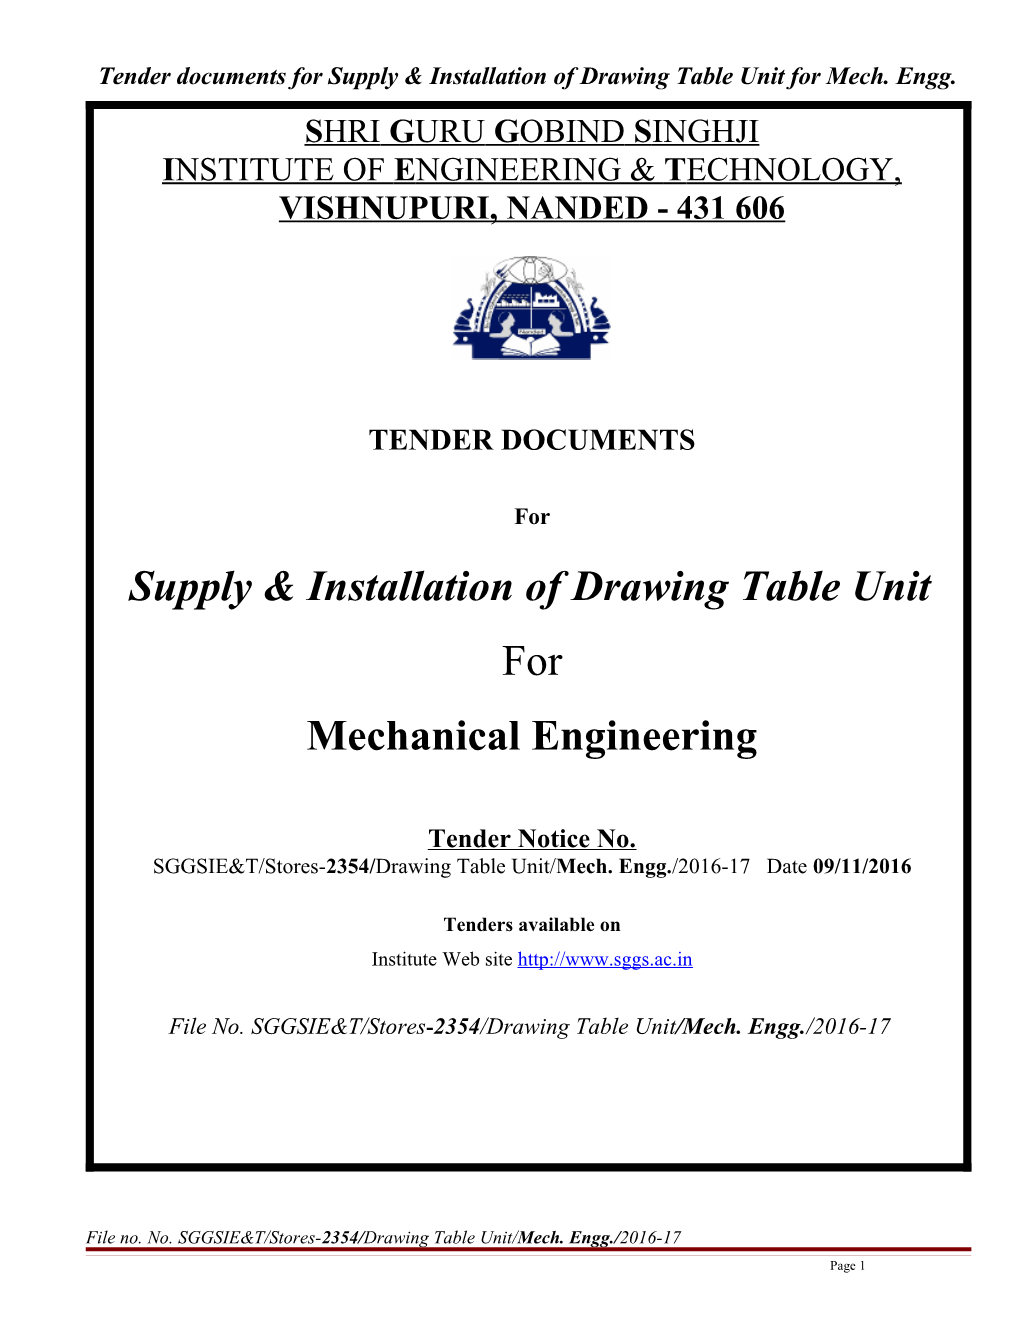 Tender Documents for Supply & Installation of Drawing Table Unitfor Mech. Engg